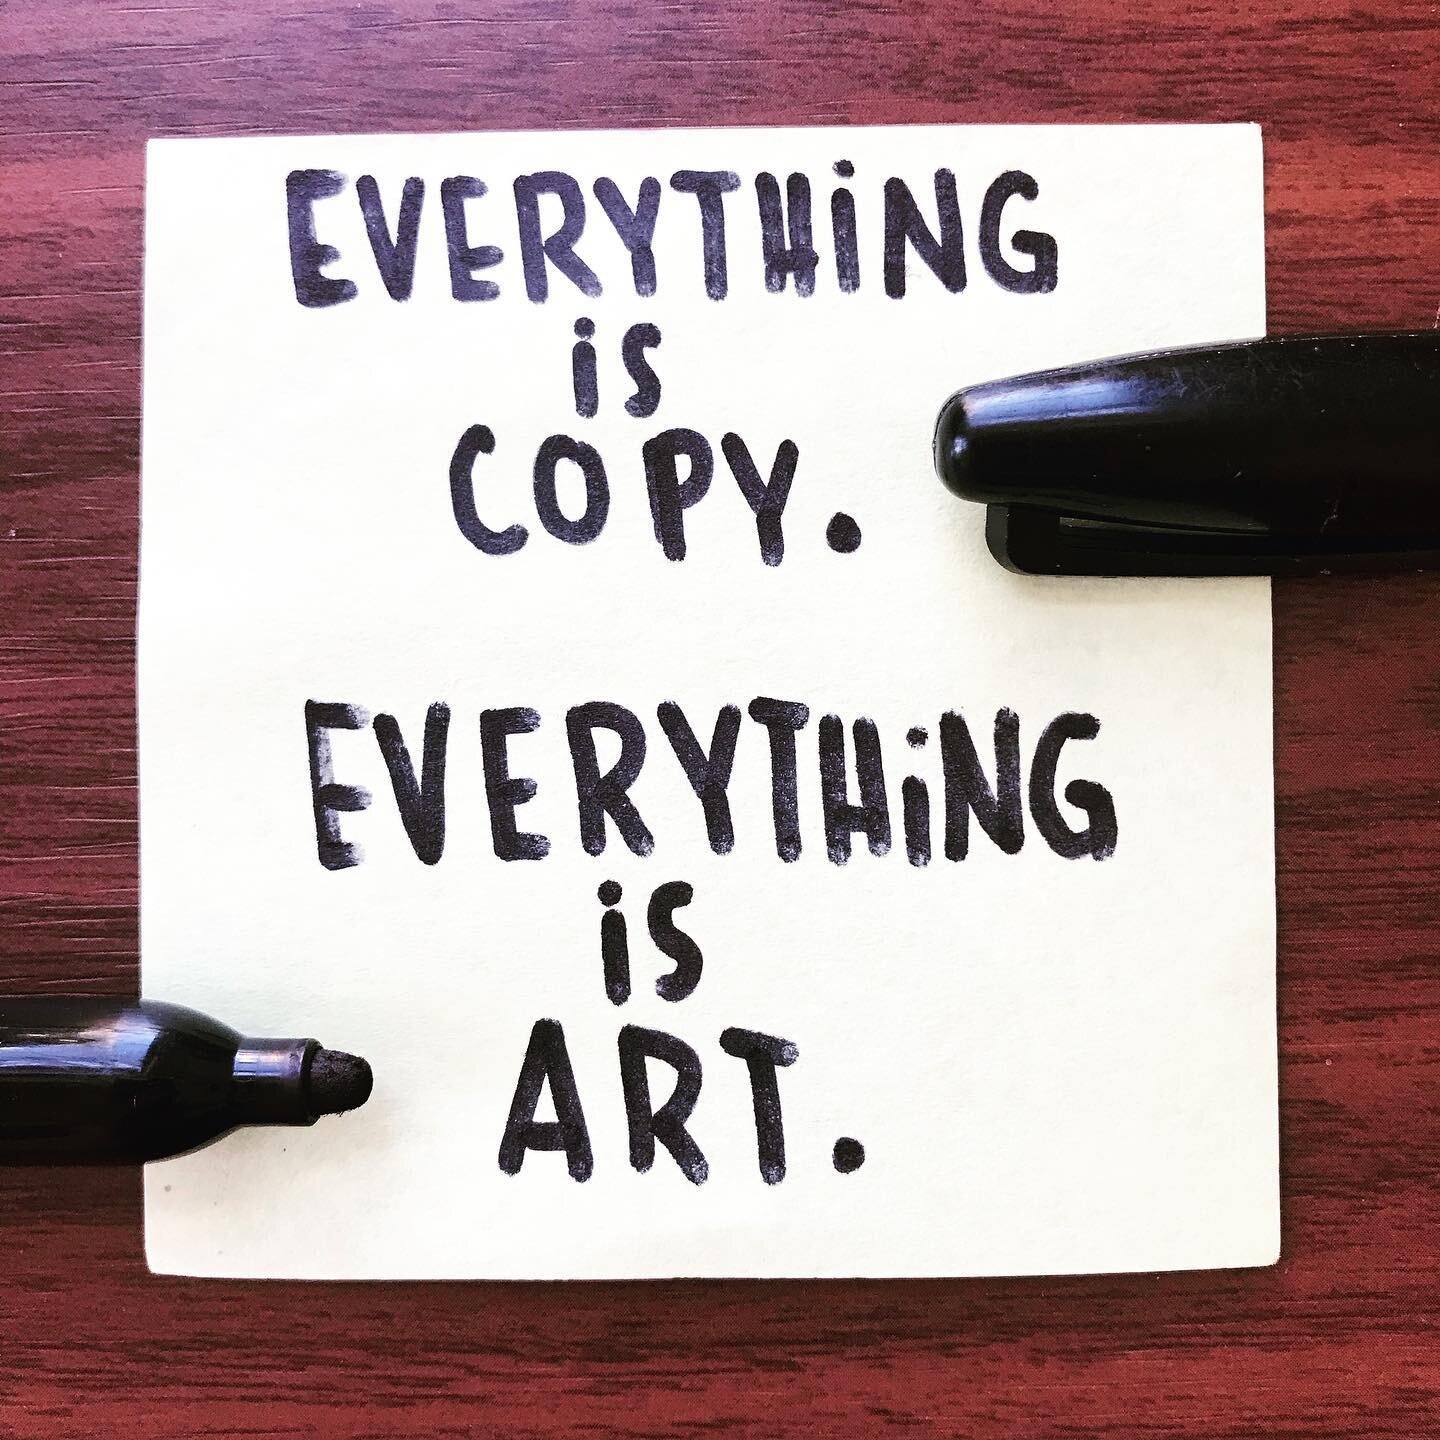 Nora Ephron is a celebrated film writer and her philosophy is &ldquo;everything is copy&rdquo;. (Copy as in writing.) Meaning, all your experiences, feelings, thoughts, joys, fears, pride, insecurities, successes, failures, love, or heartbreak, to ch